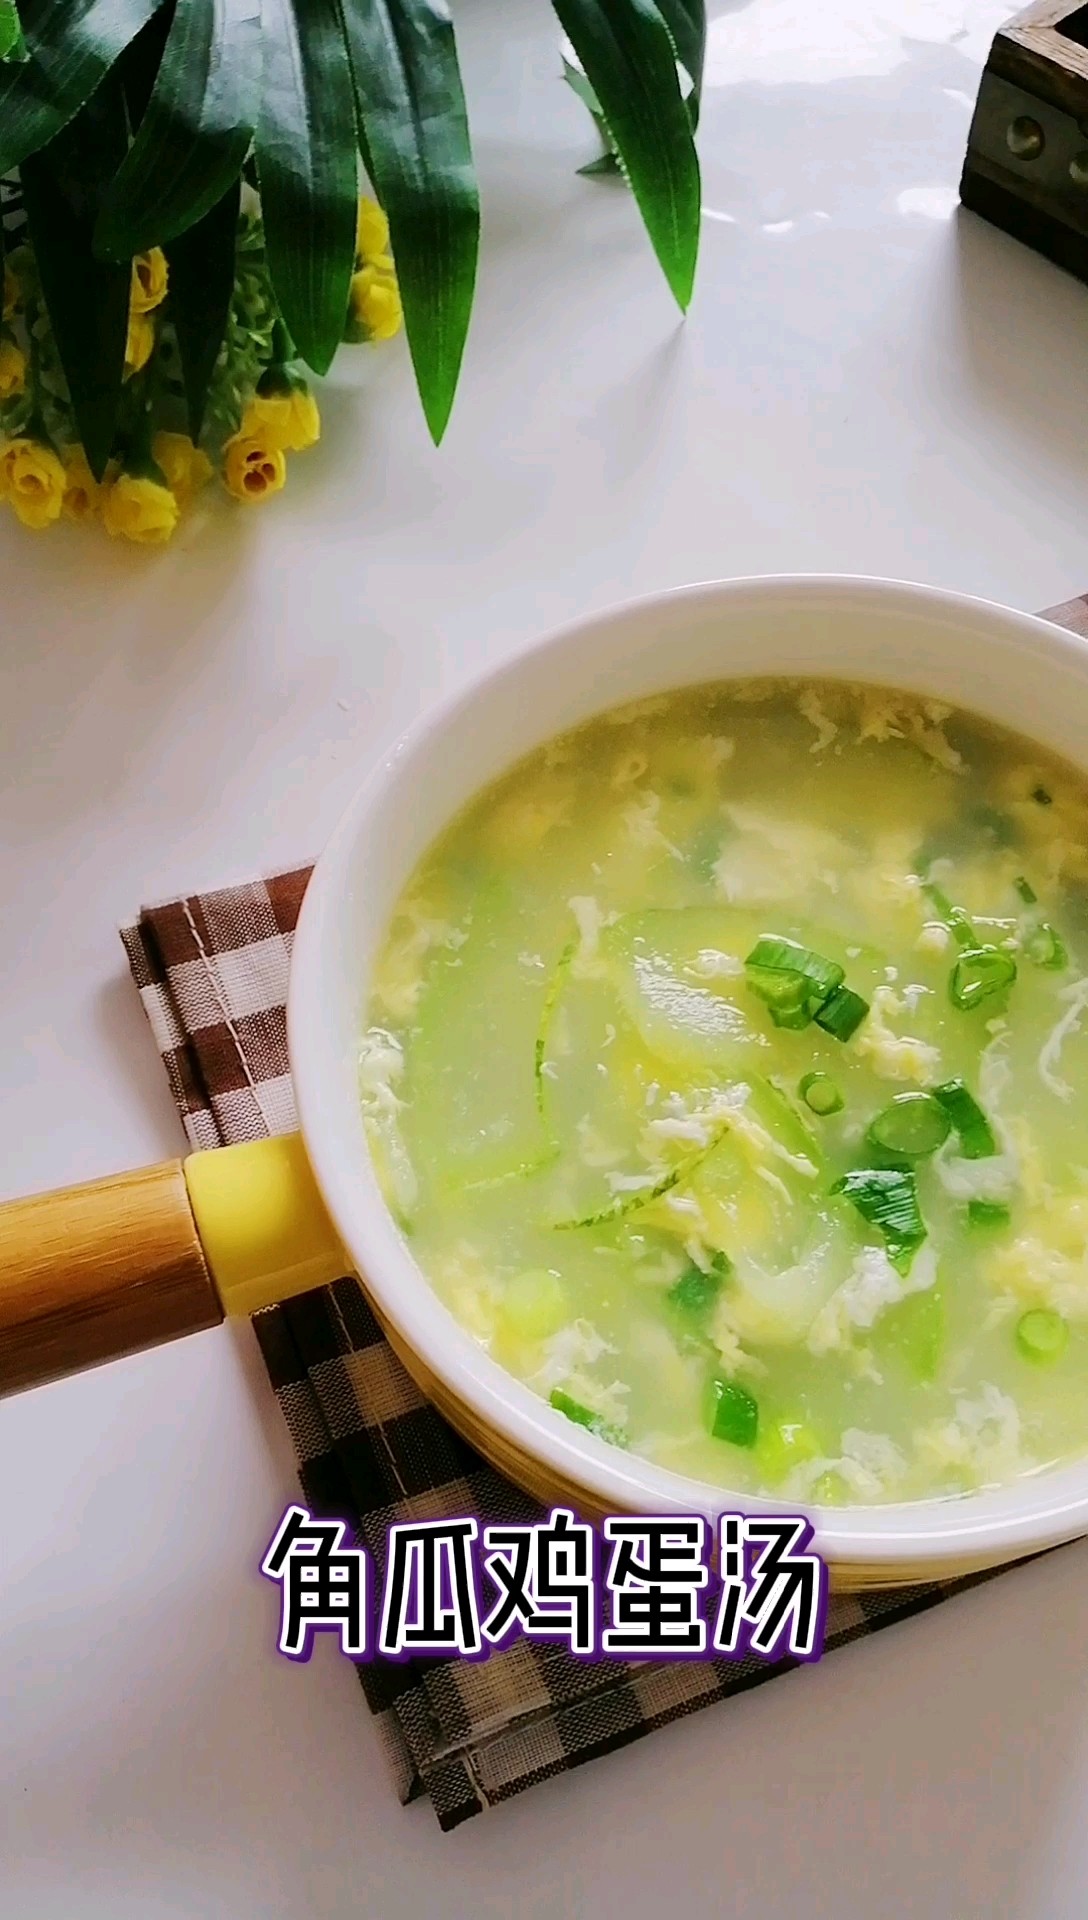 Horn Melon and Egg Soup recipe